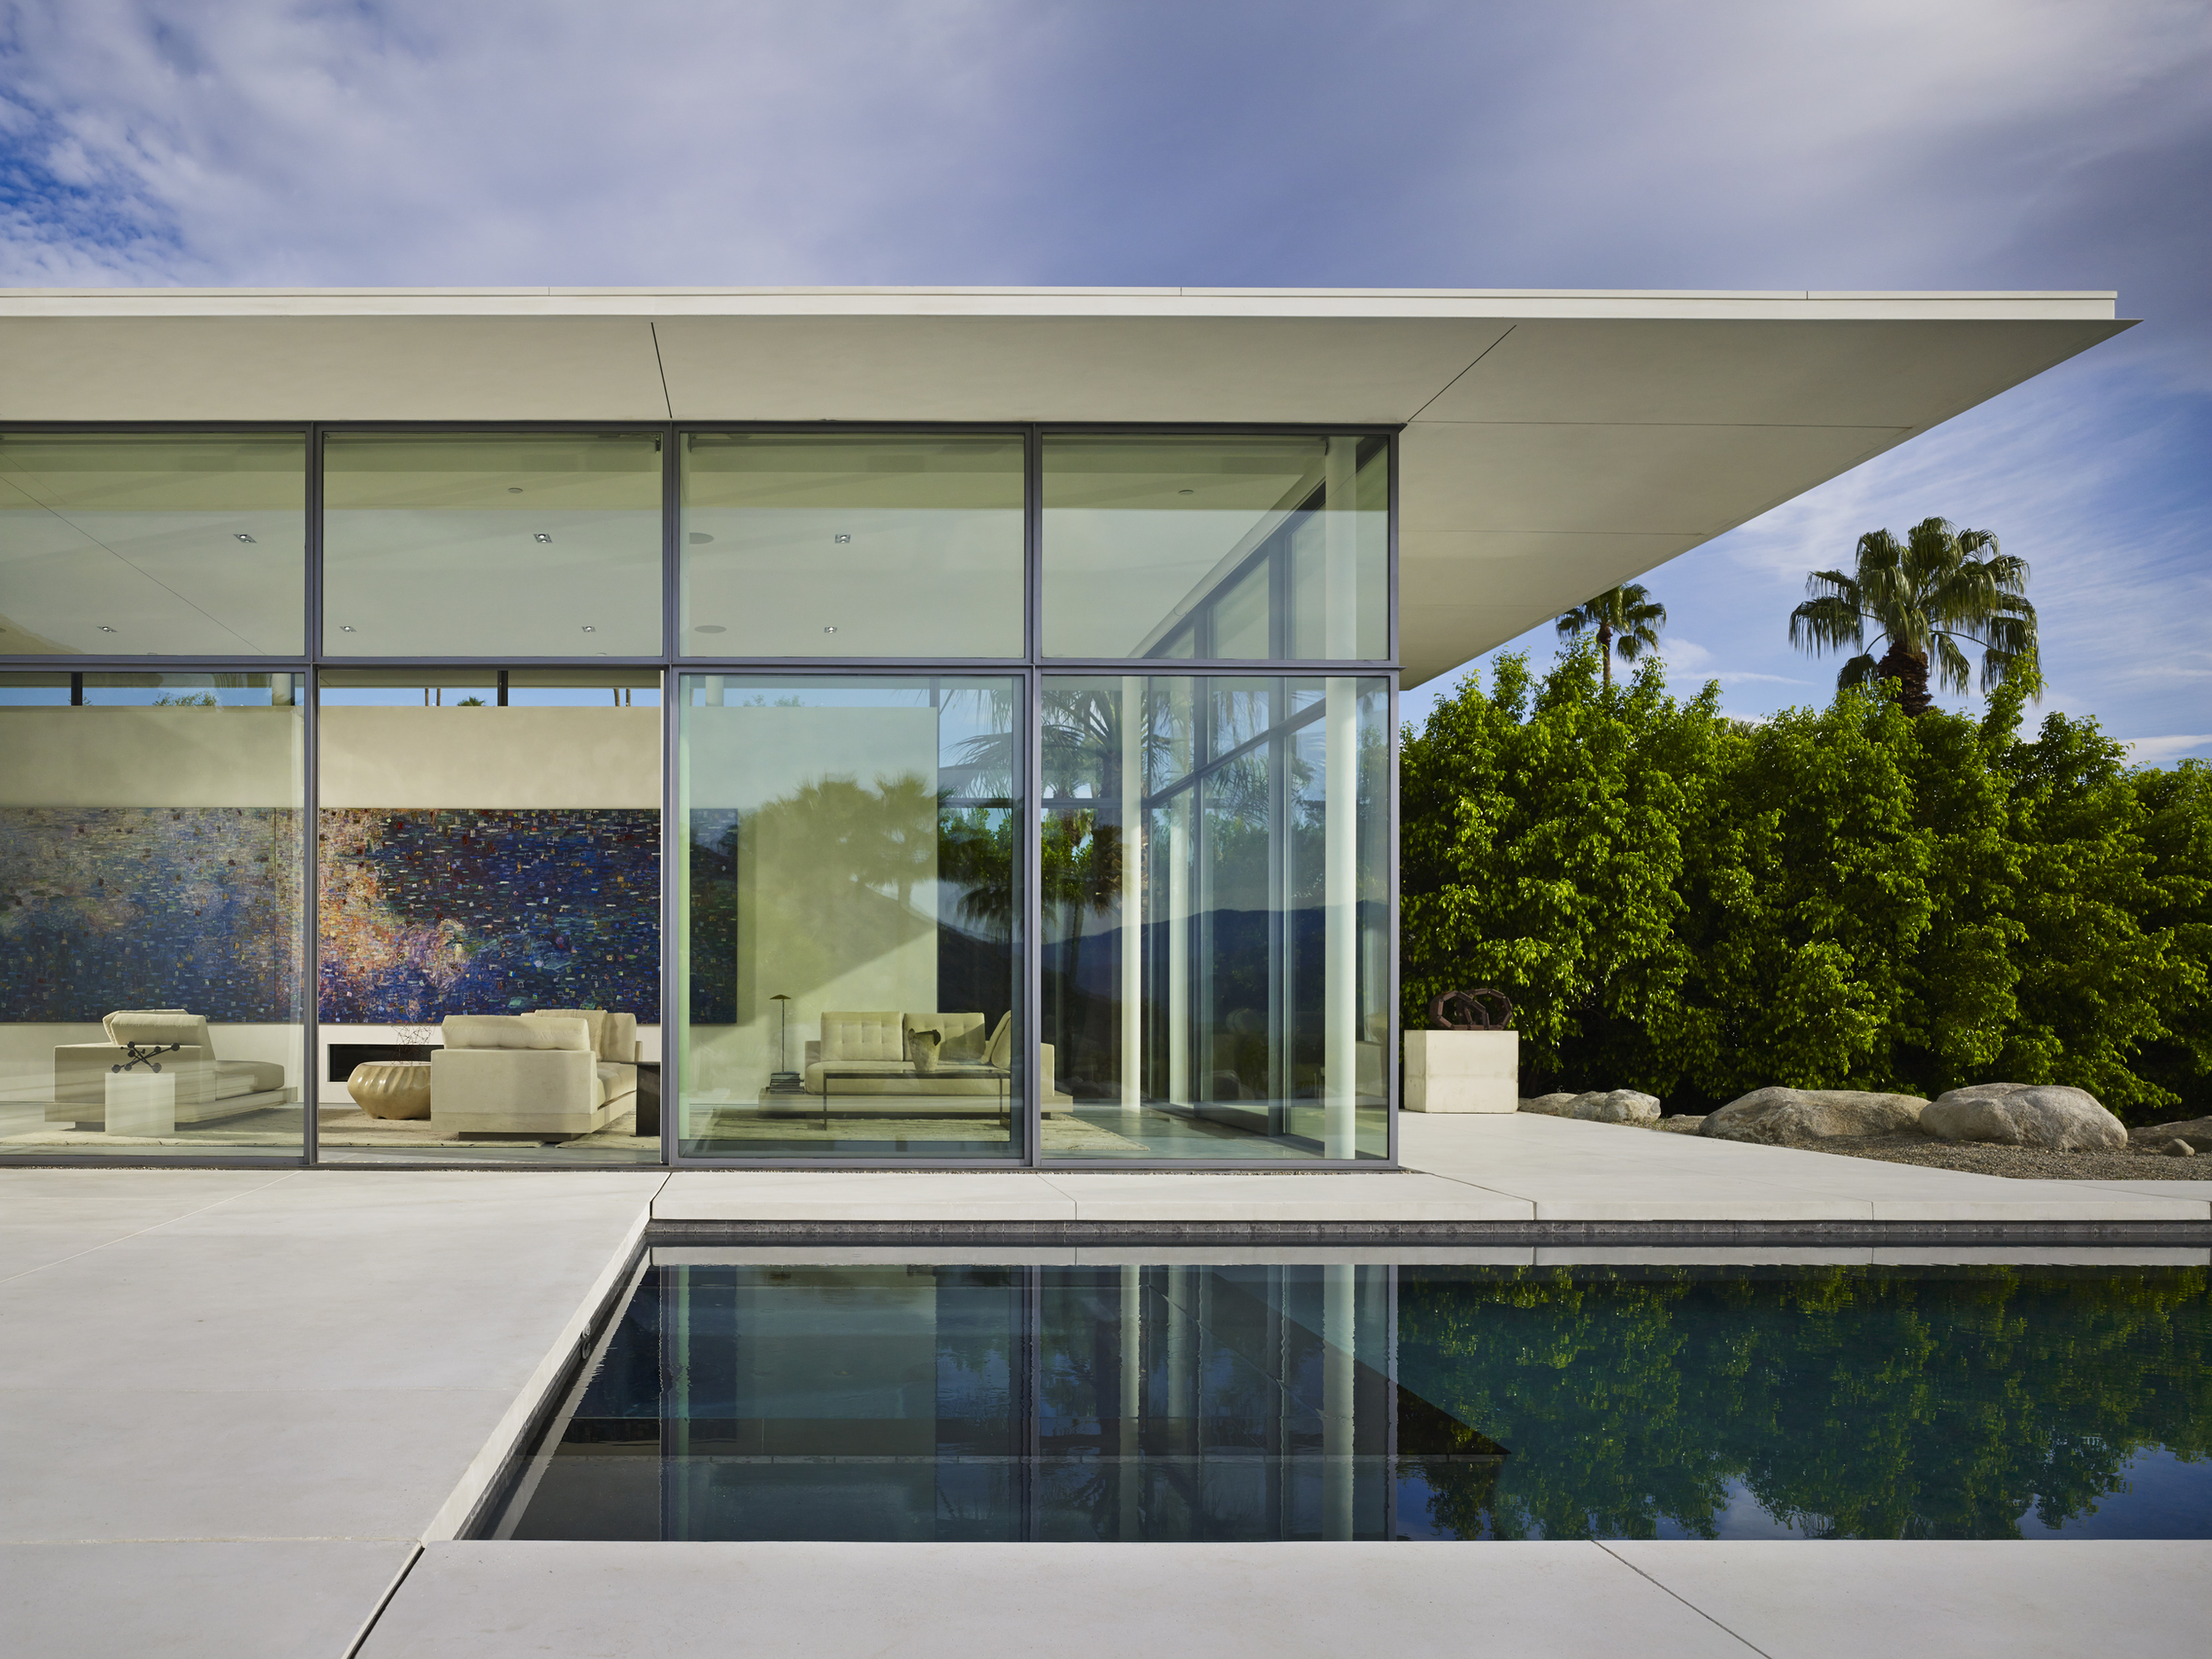  Panorama House  Booth Hansen Architects  Palm Springs, CA      View Full Project  